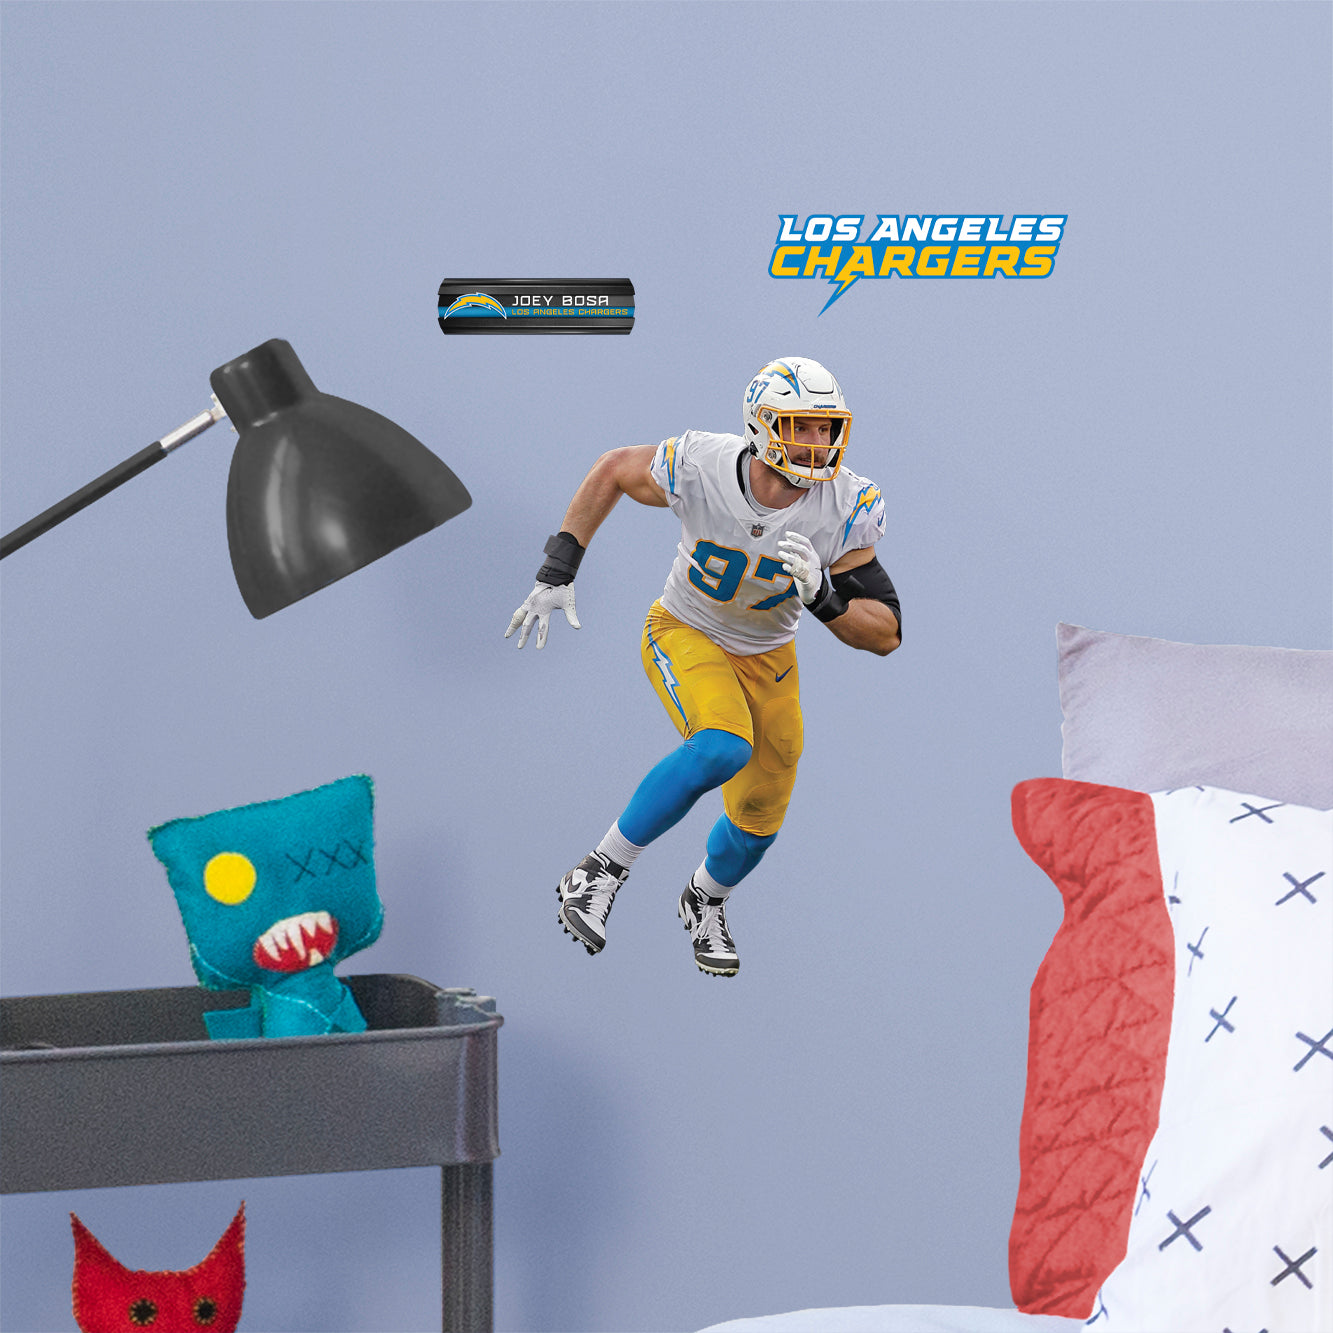 Joey Bosa 2020 - Officially Licensed NFL Removable Wall Decal Large by Fathead | Vinyl